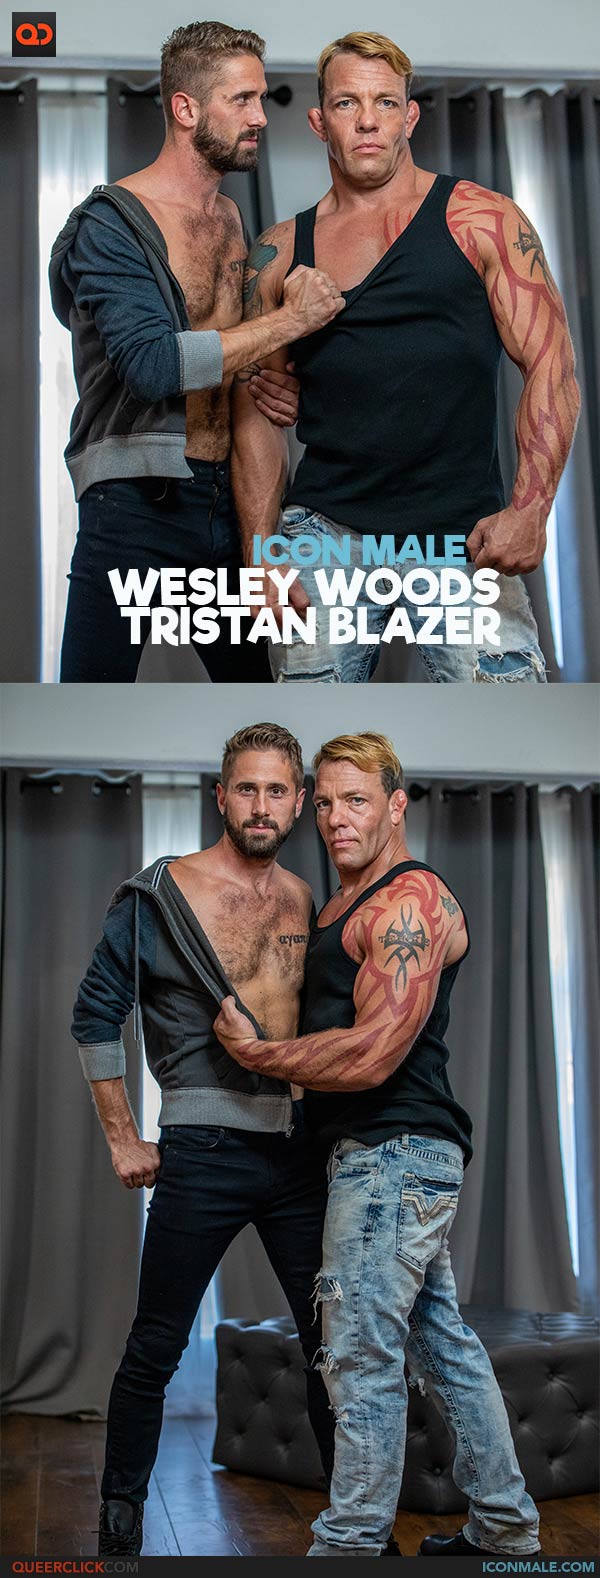 IconMale: Tristan Blazer and Wesley Woods